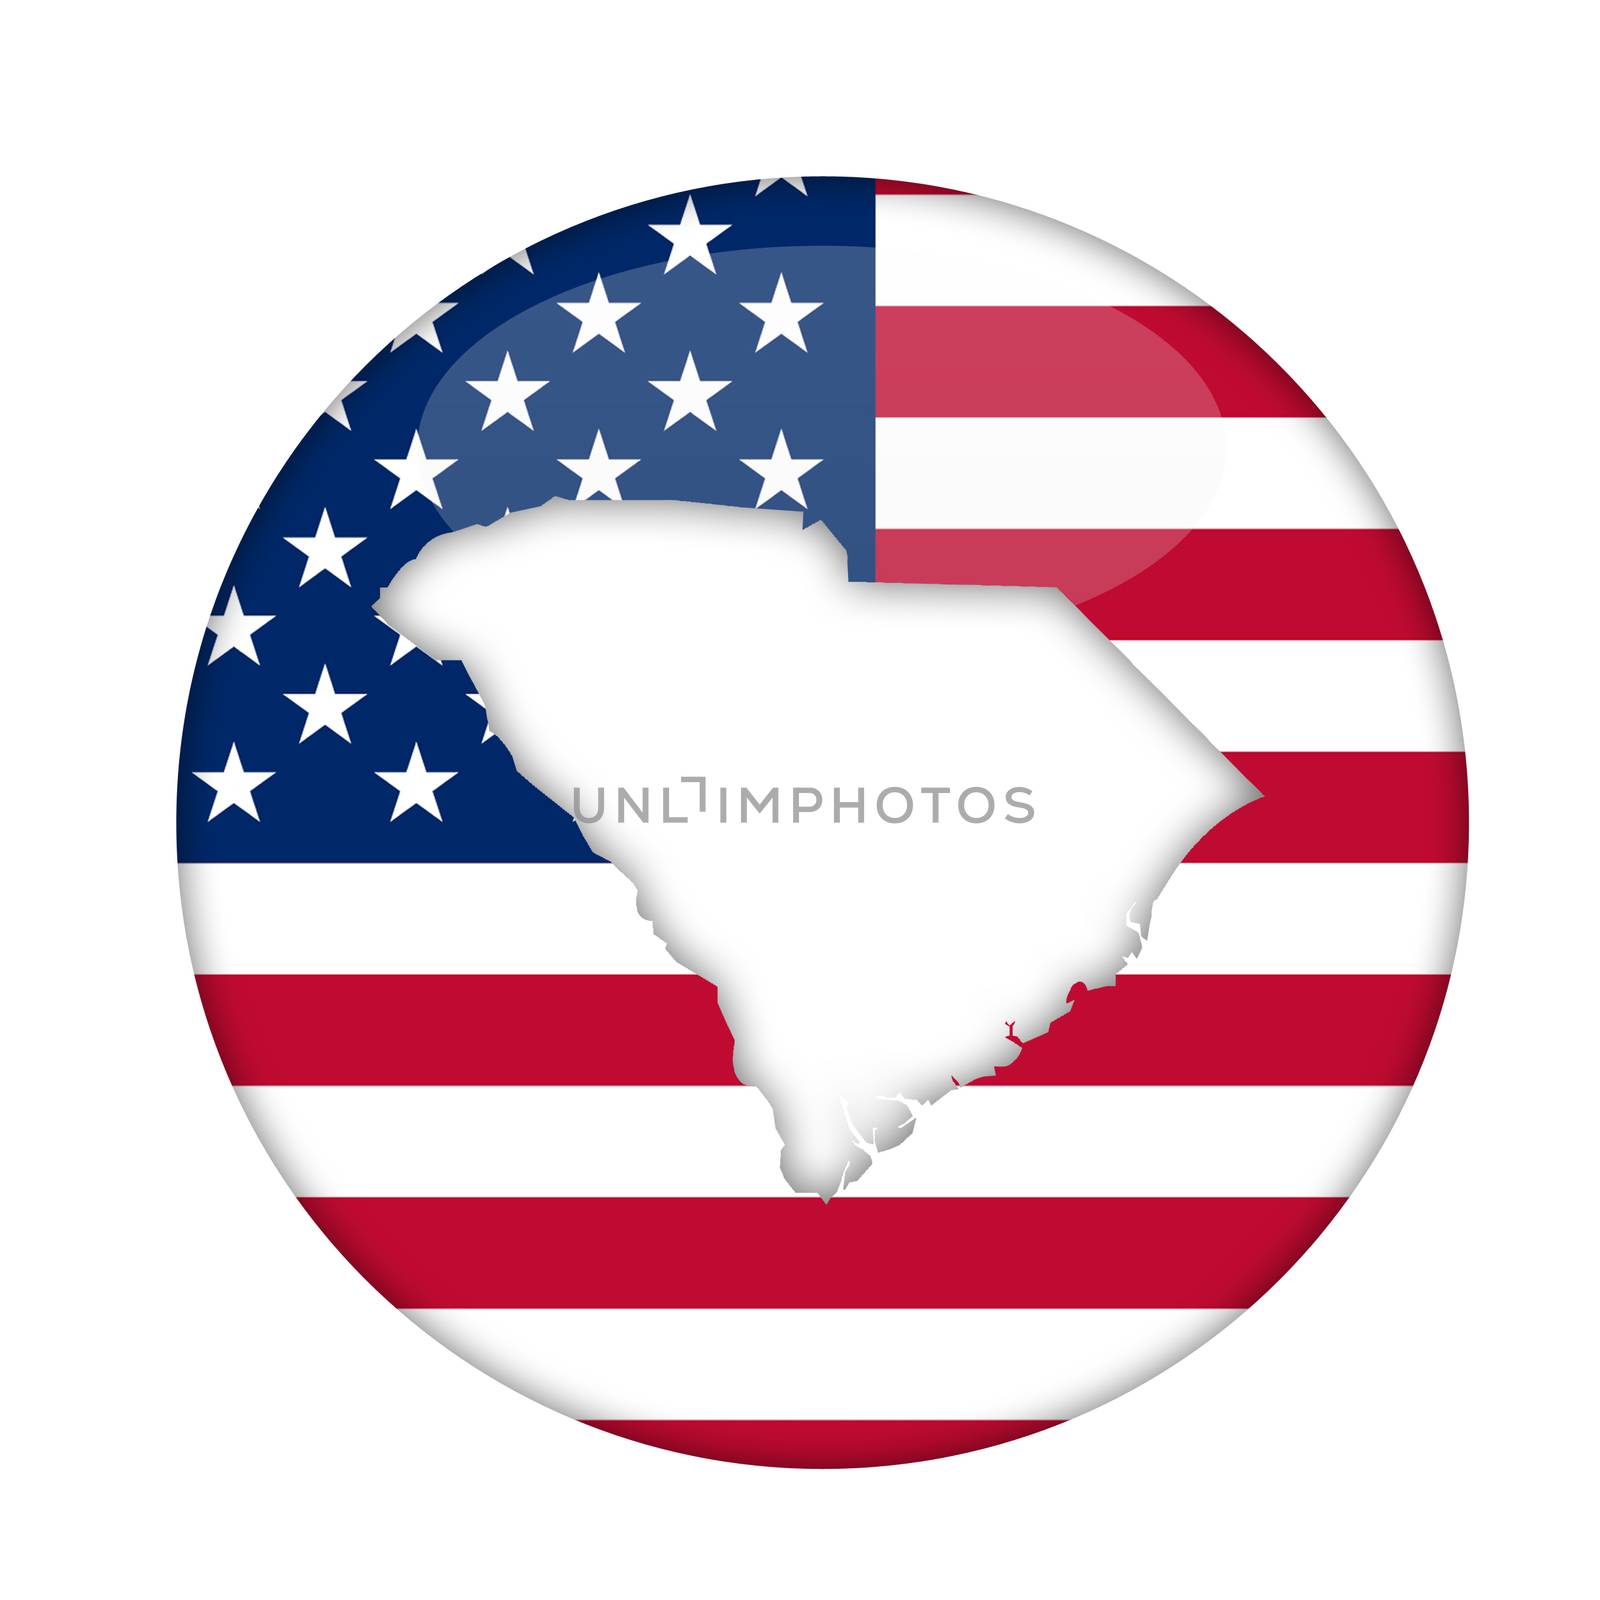 South Carolina state of America badge isolated on a white background.